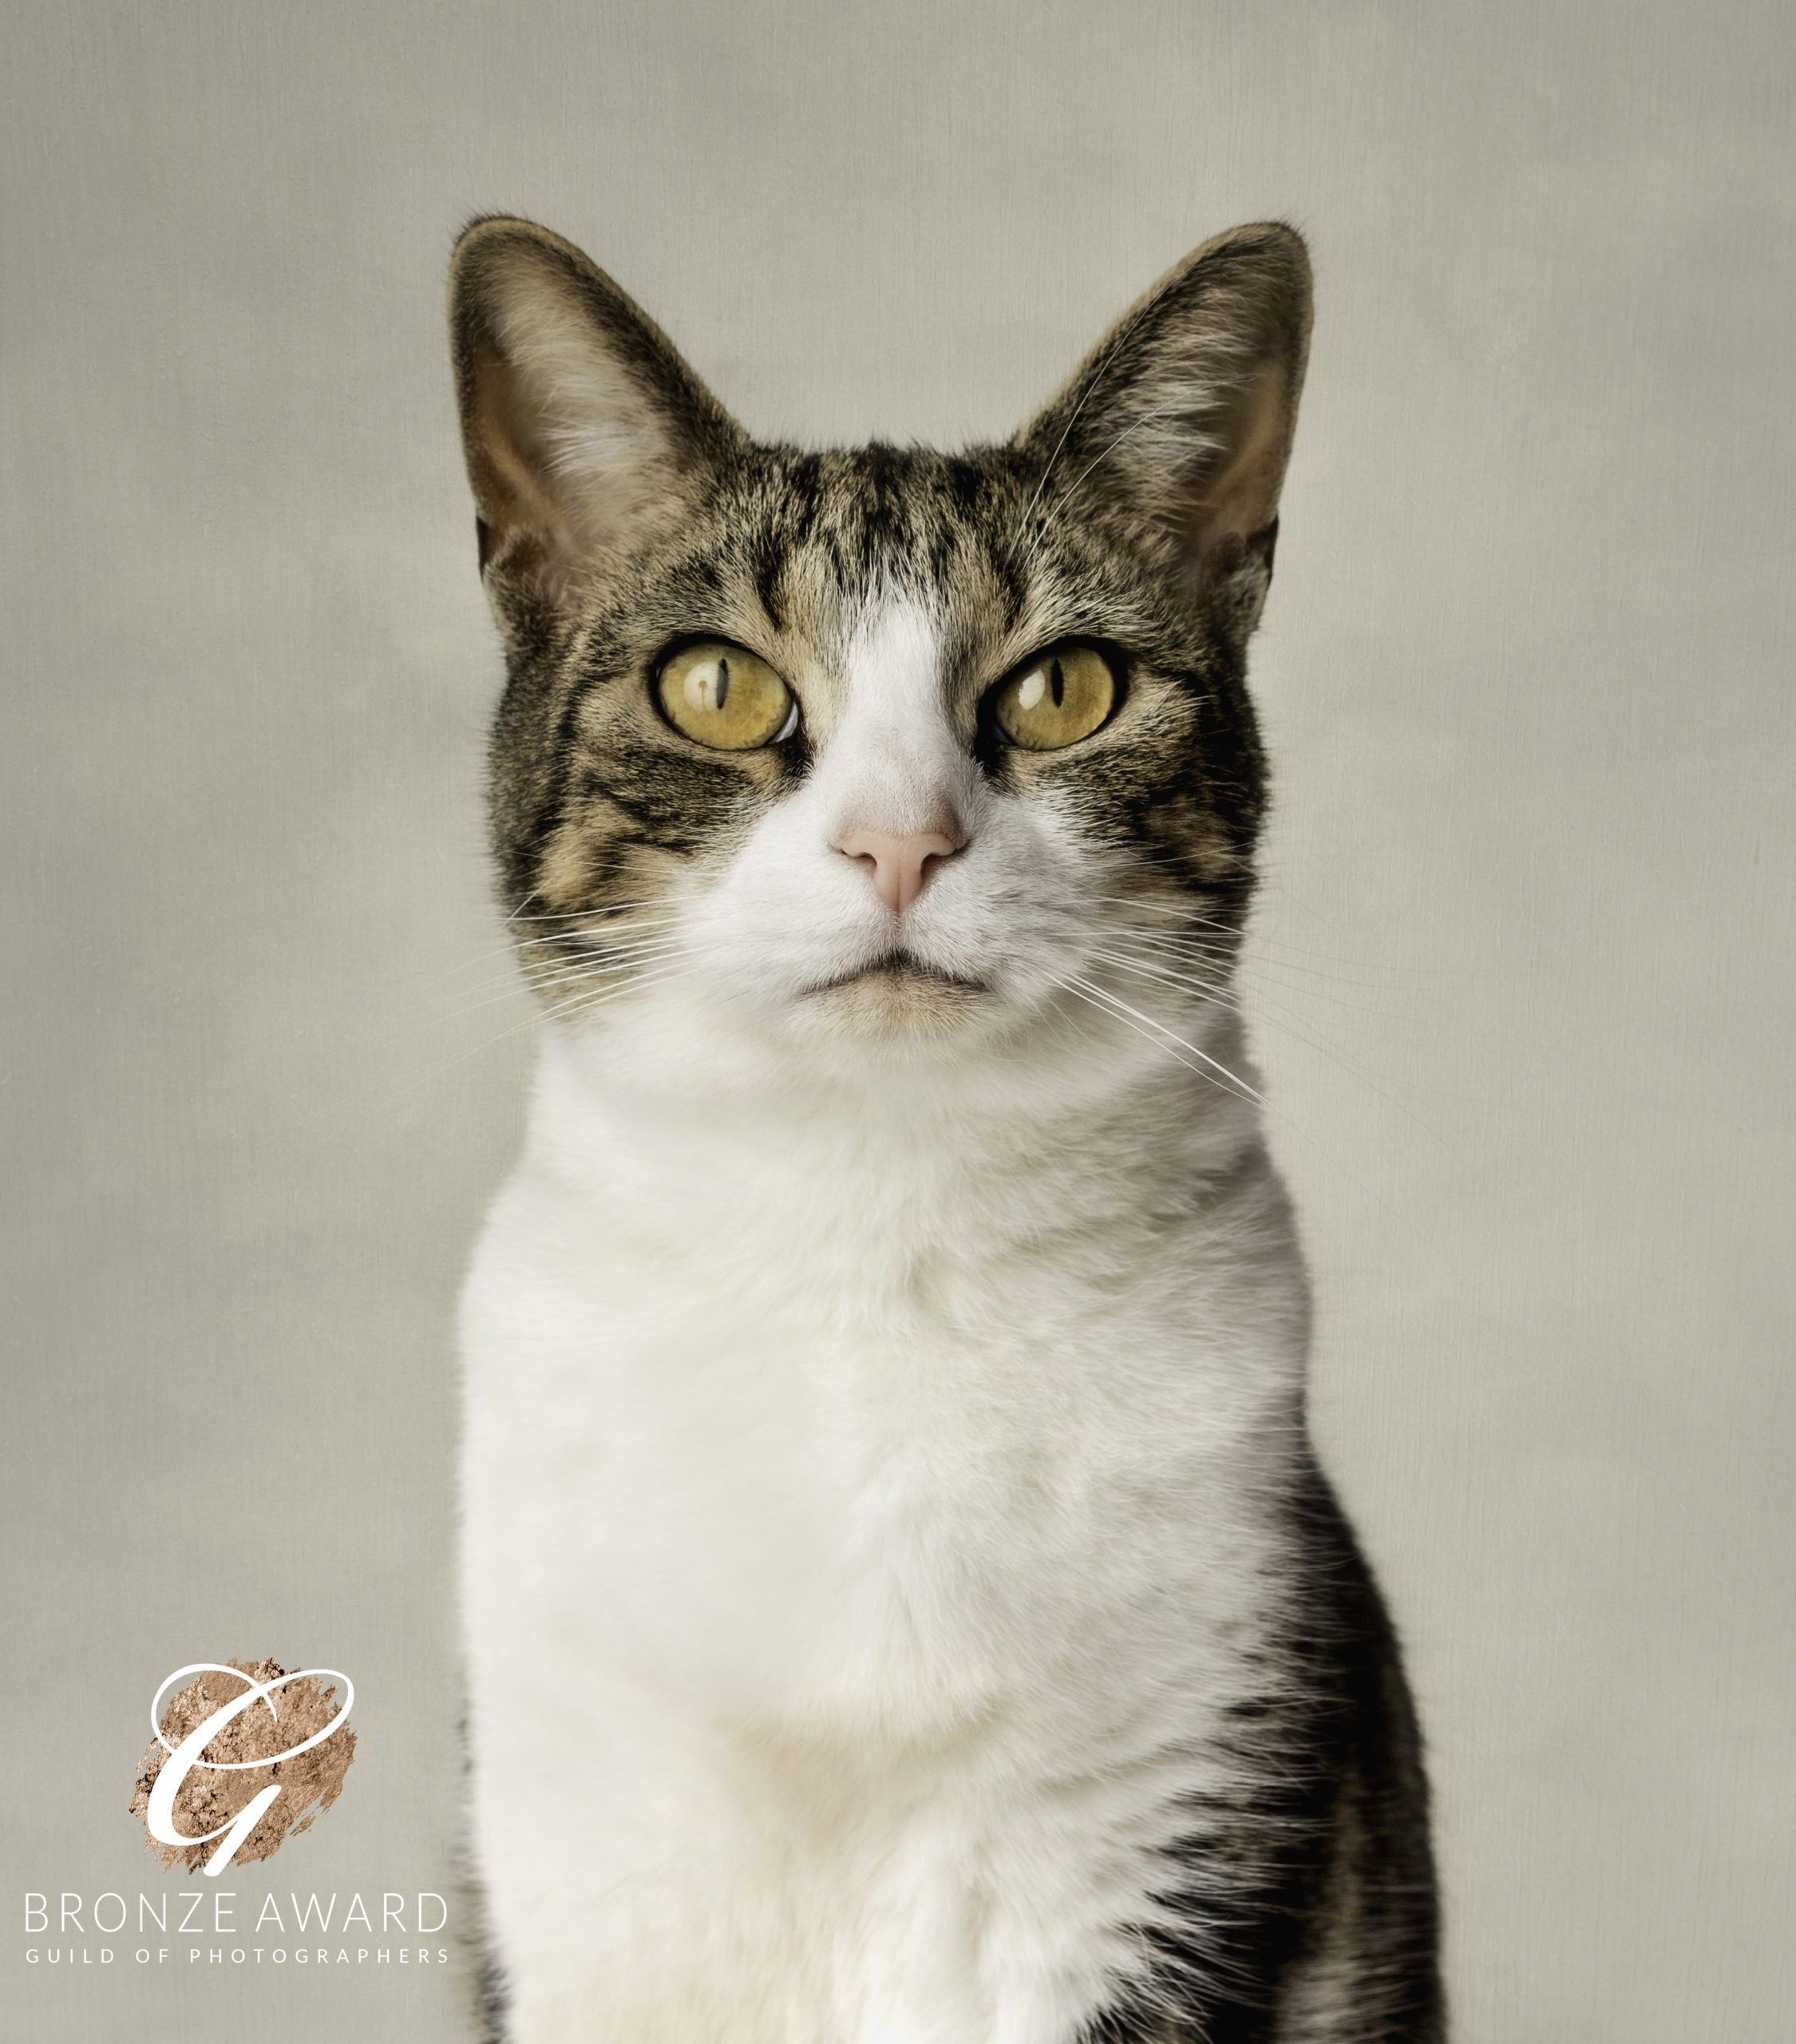 Tabby Cat having a studio photography session with Dawn Hilton Photography, Melton Mowbray, Leicestershire